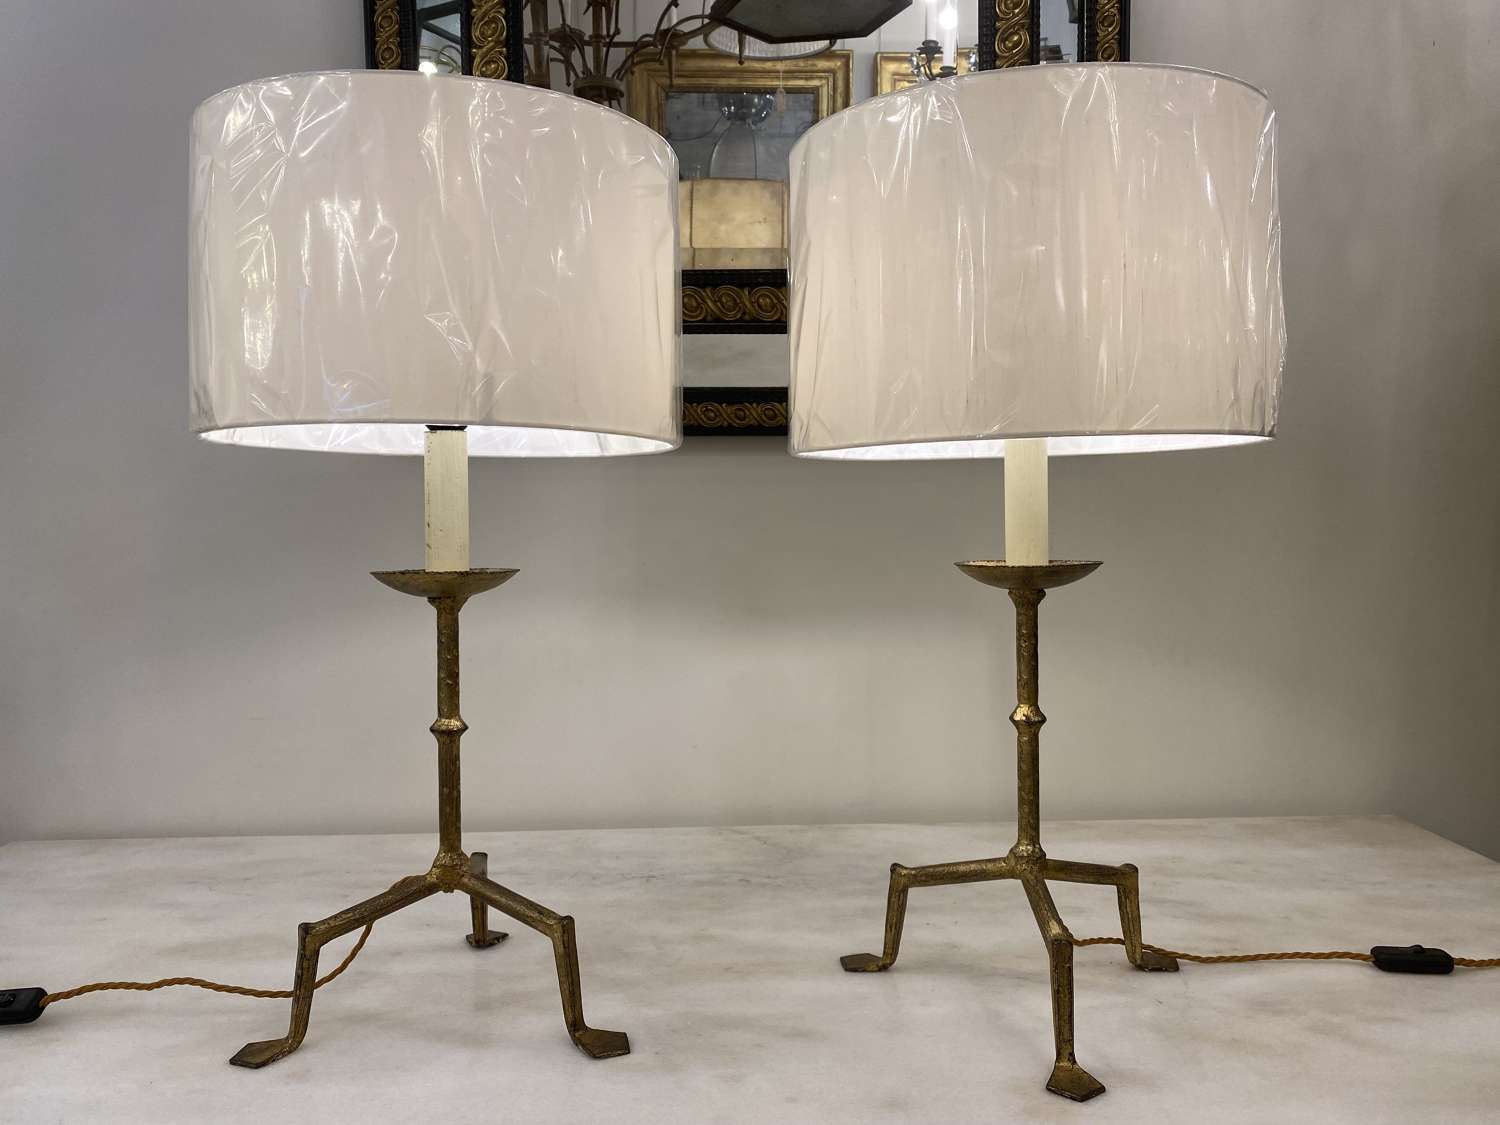 C1960 A Pair of Stylish Spanish Gilt Iron Table Lamps